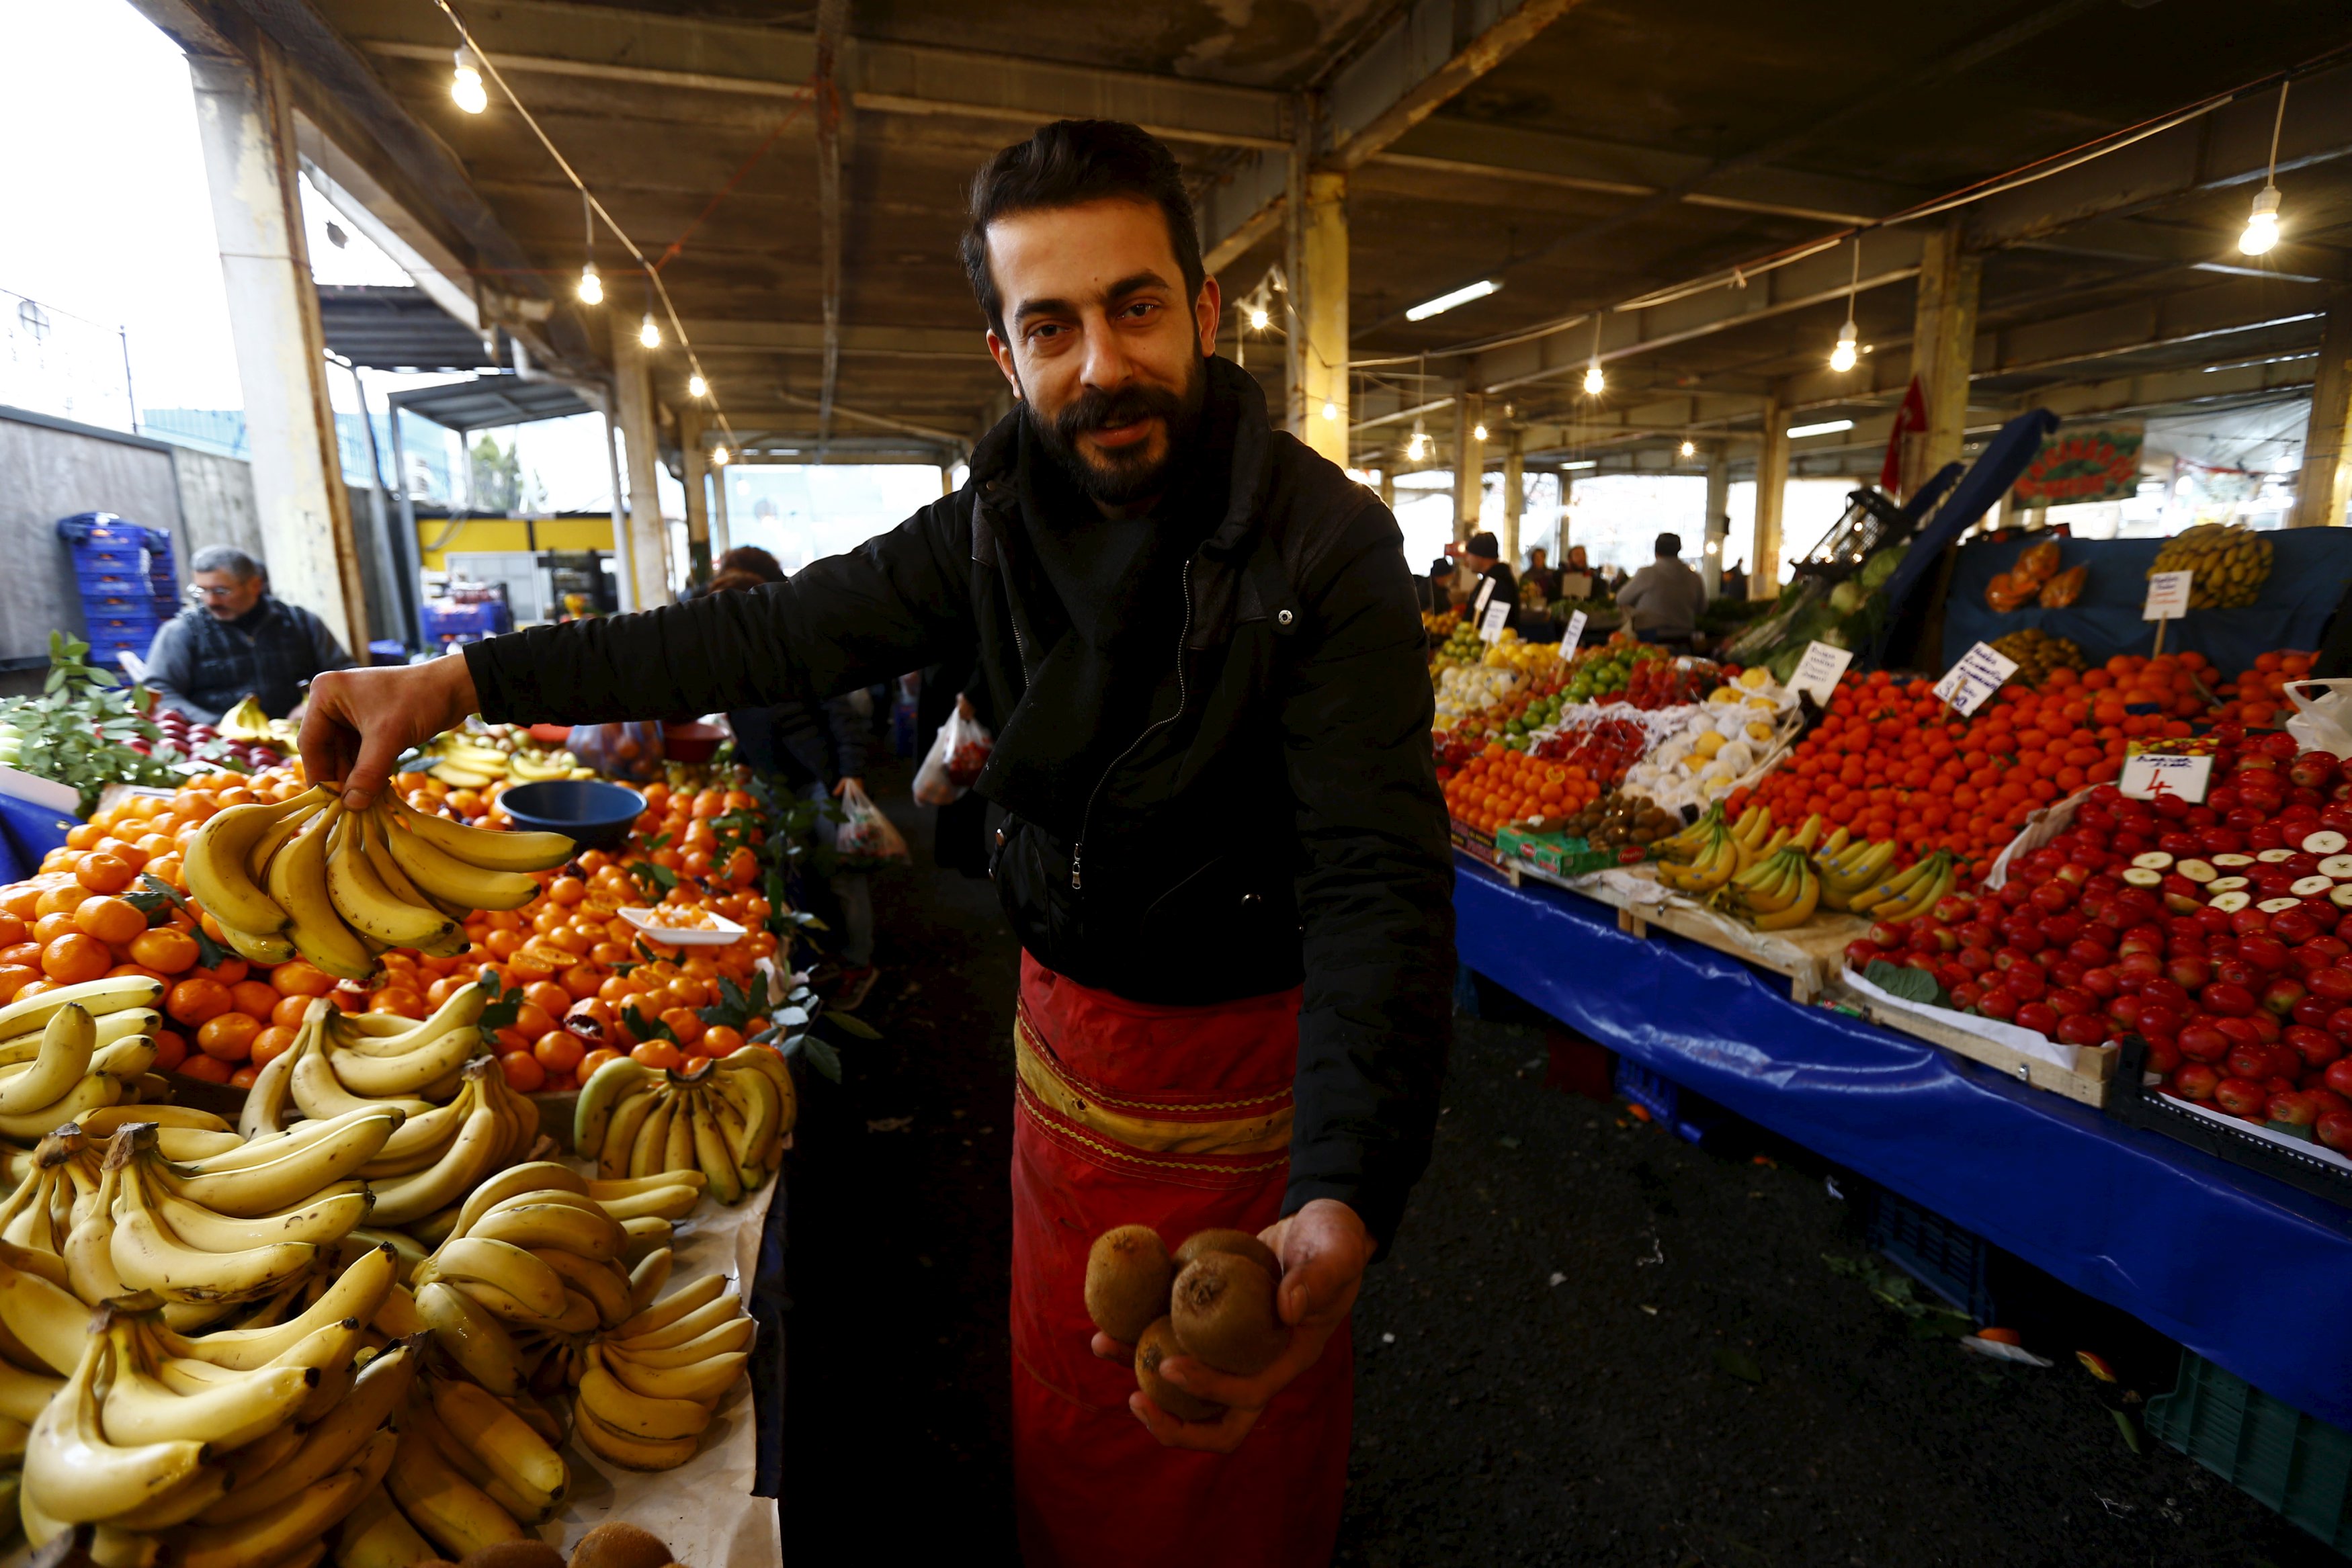 <p>A stallholder sells fruits at a bazaar in Istanbul, Turkey January 30, 2016. Inflation has become Turkey's biggest economic challenge, hitting the pockets of ordinary people even as President Tayyip Erdogan and the ruling party have built their reputation largely on economic growth and stability. Picture taken January 30, 2016. REUTERS/Murad Sezer</p>